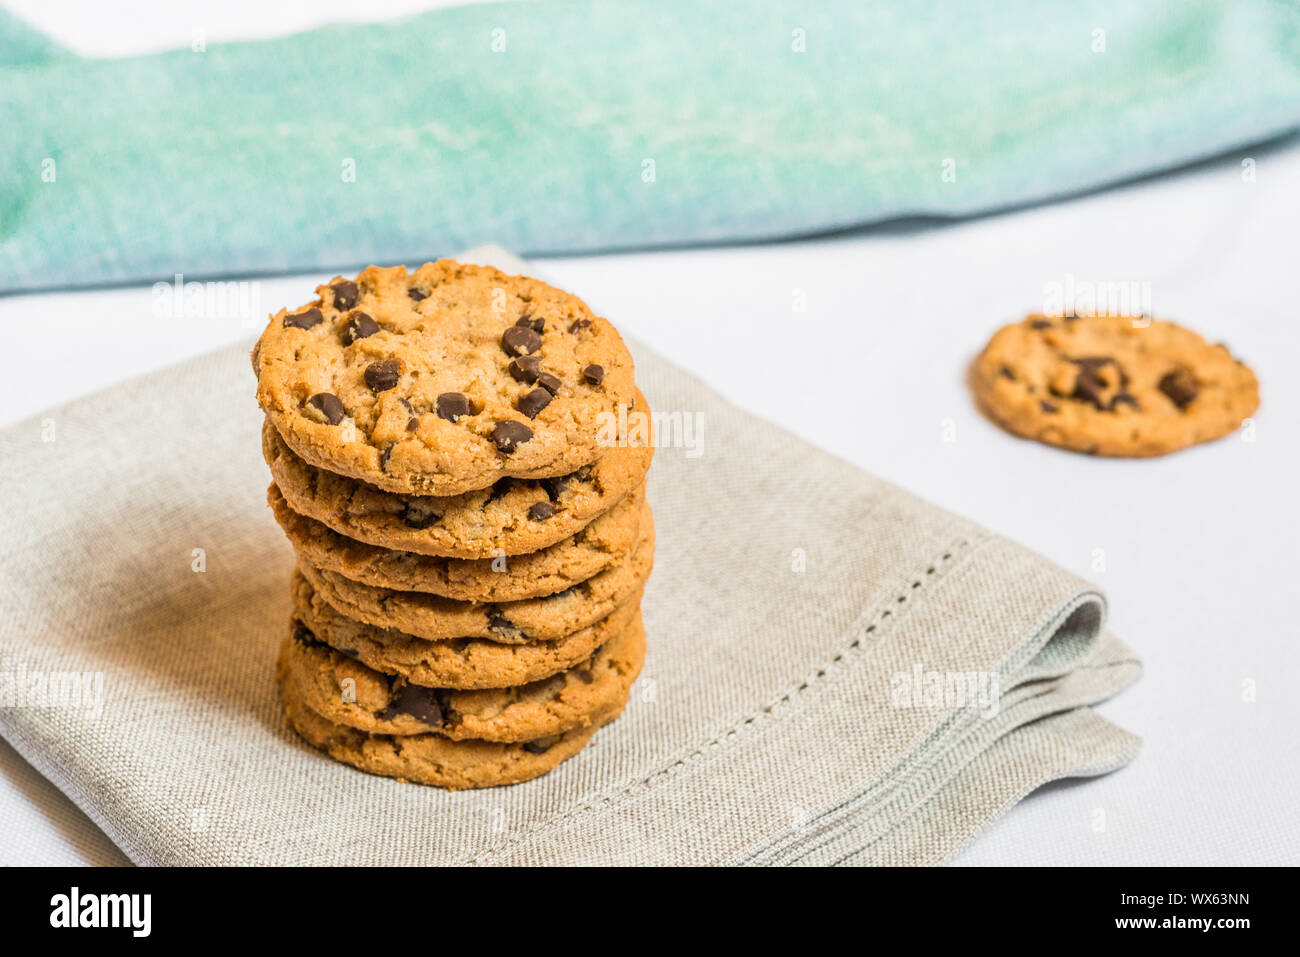 Colorful and tasty chocolate chip cookie. Concept of sweet food and dessert. Stock Photo